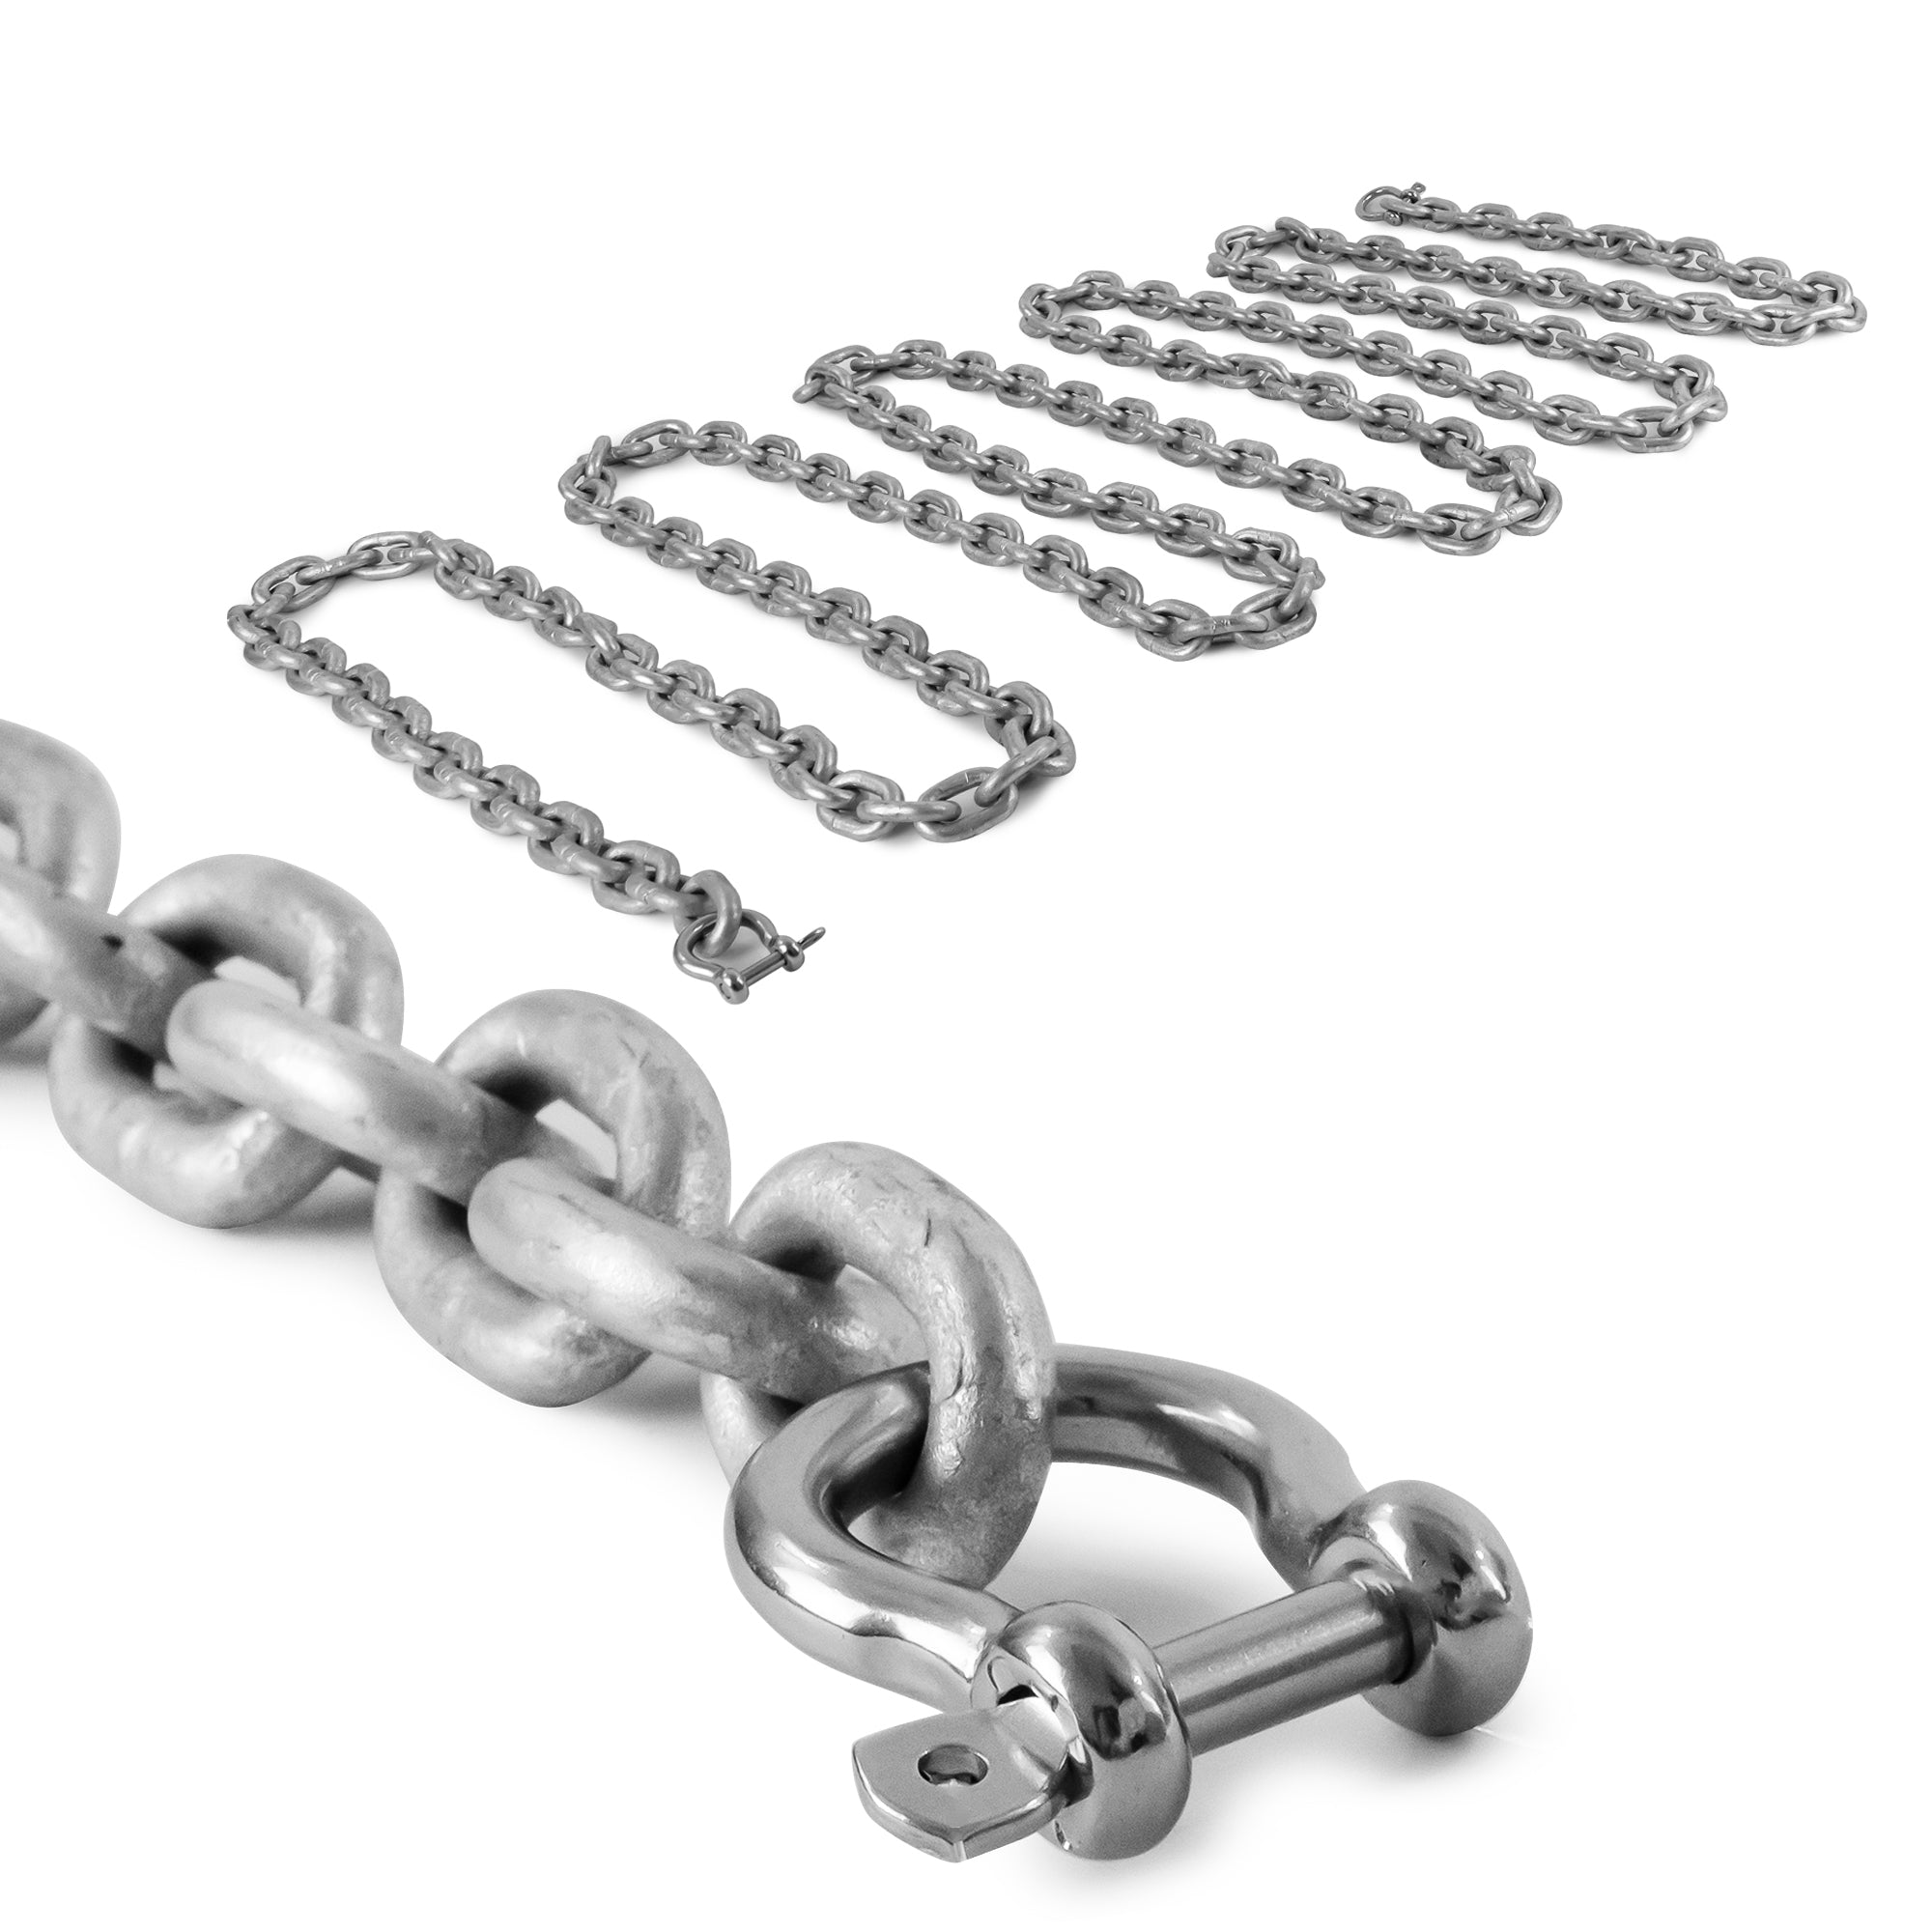 Boat Anchor Lead Chain with Shackles, 1/4" x 15', HTG4 Galvanized Steel - FO4489-G15